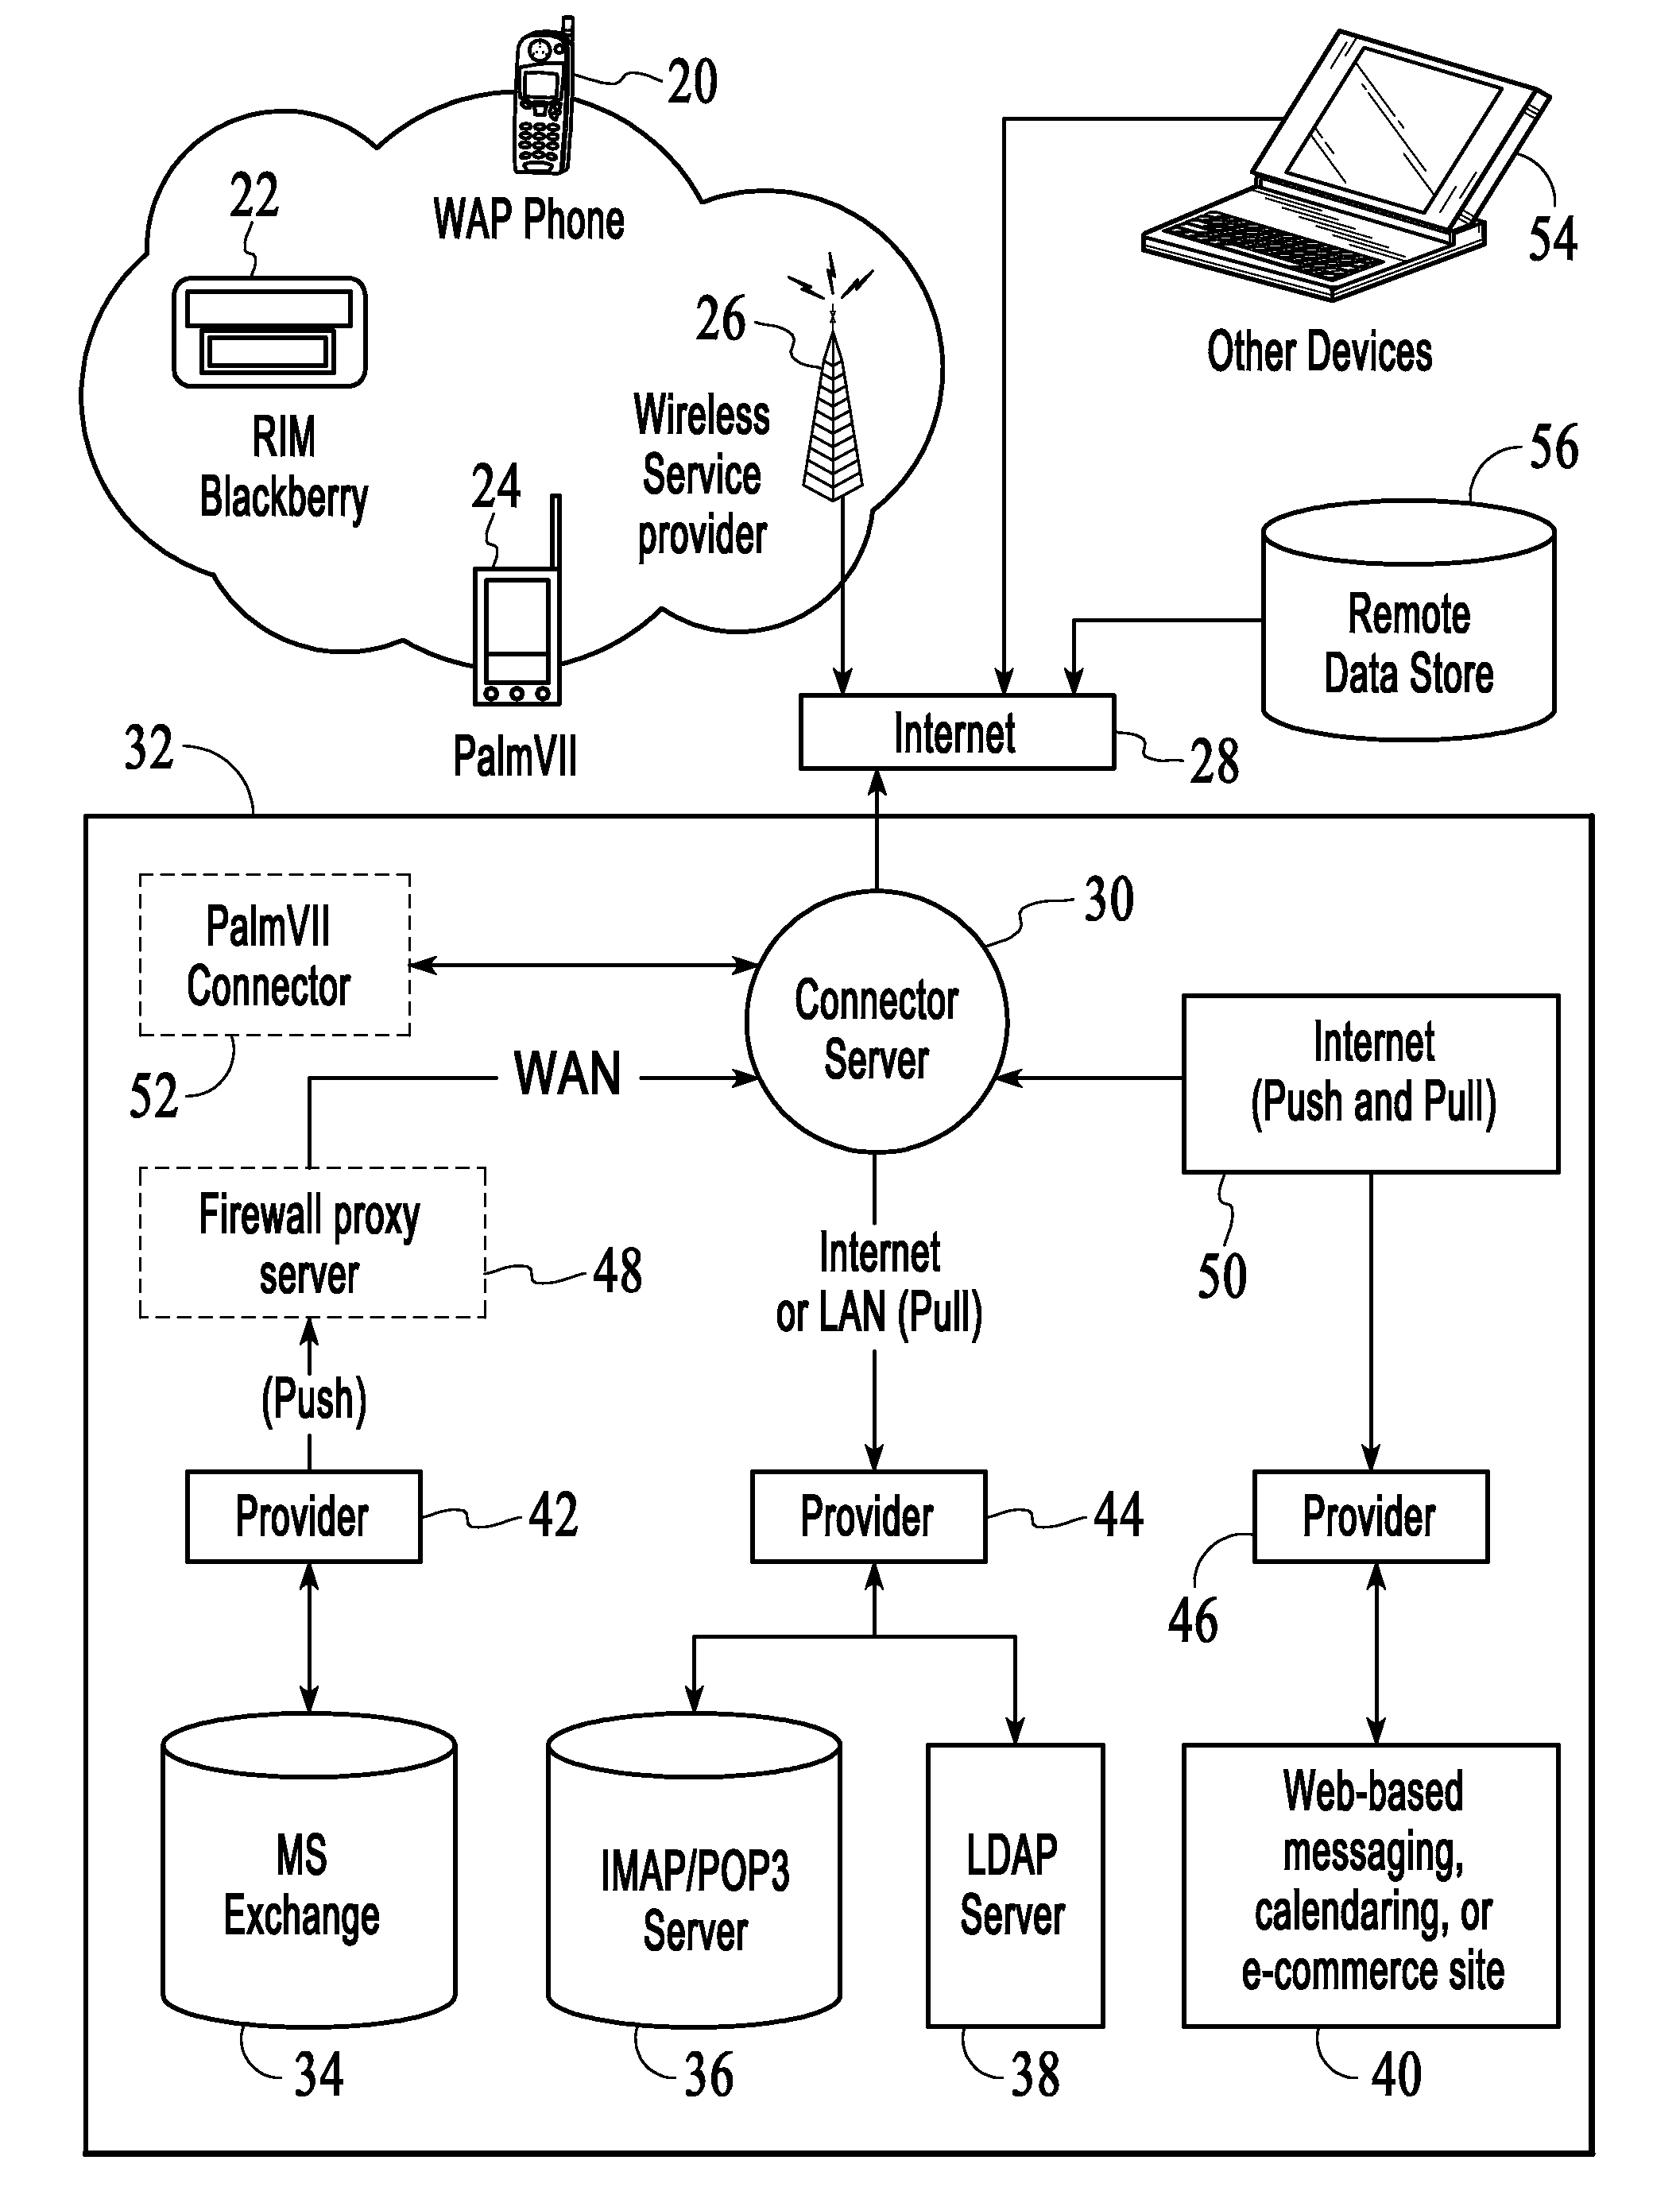 Software architecture for wireless data and method of operation thereof